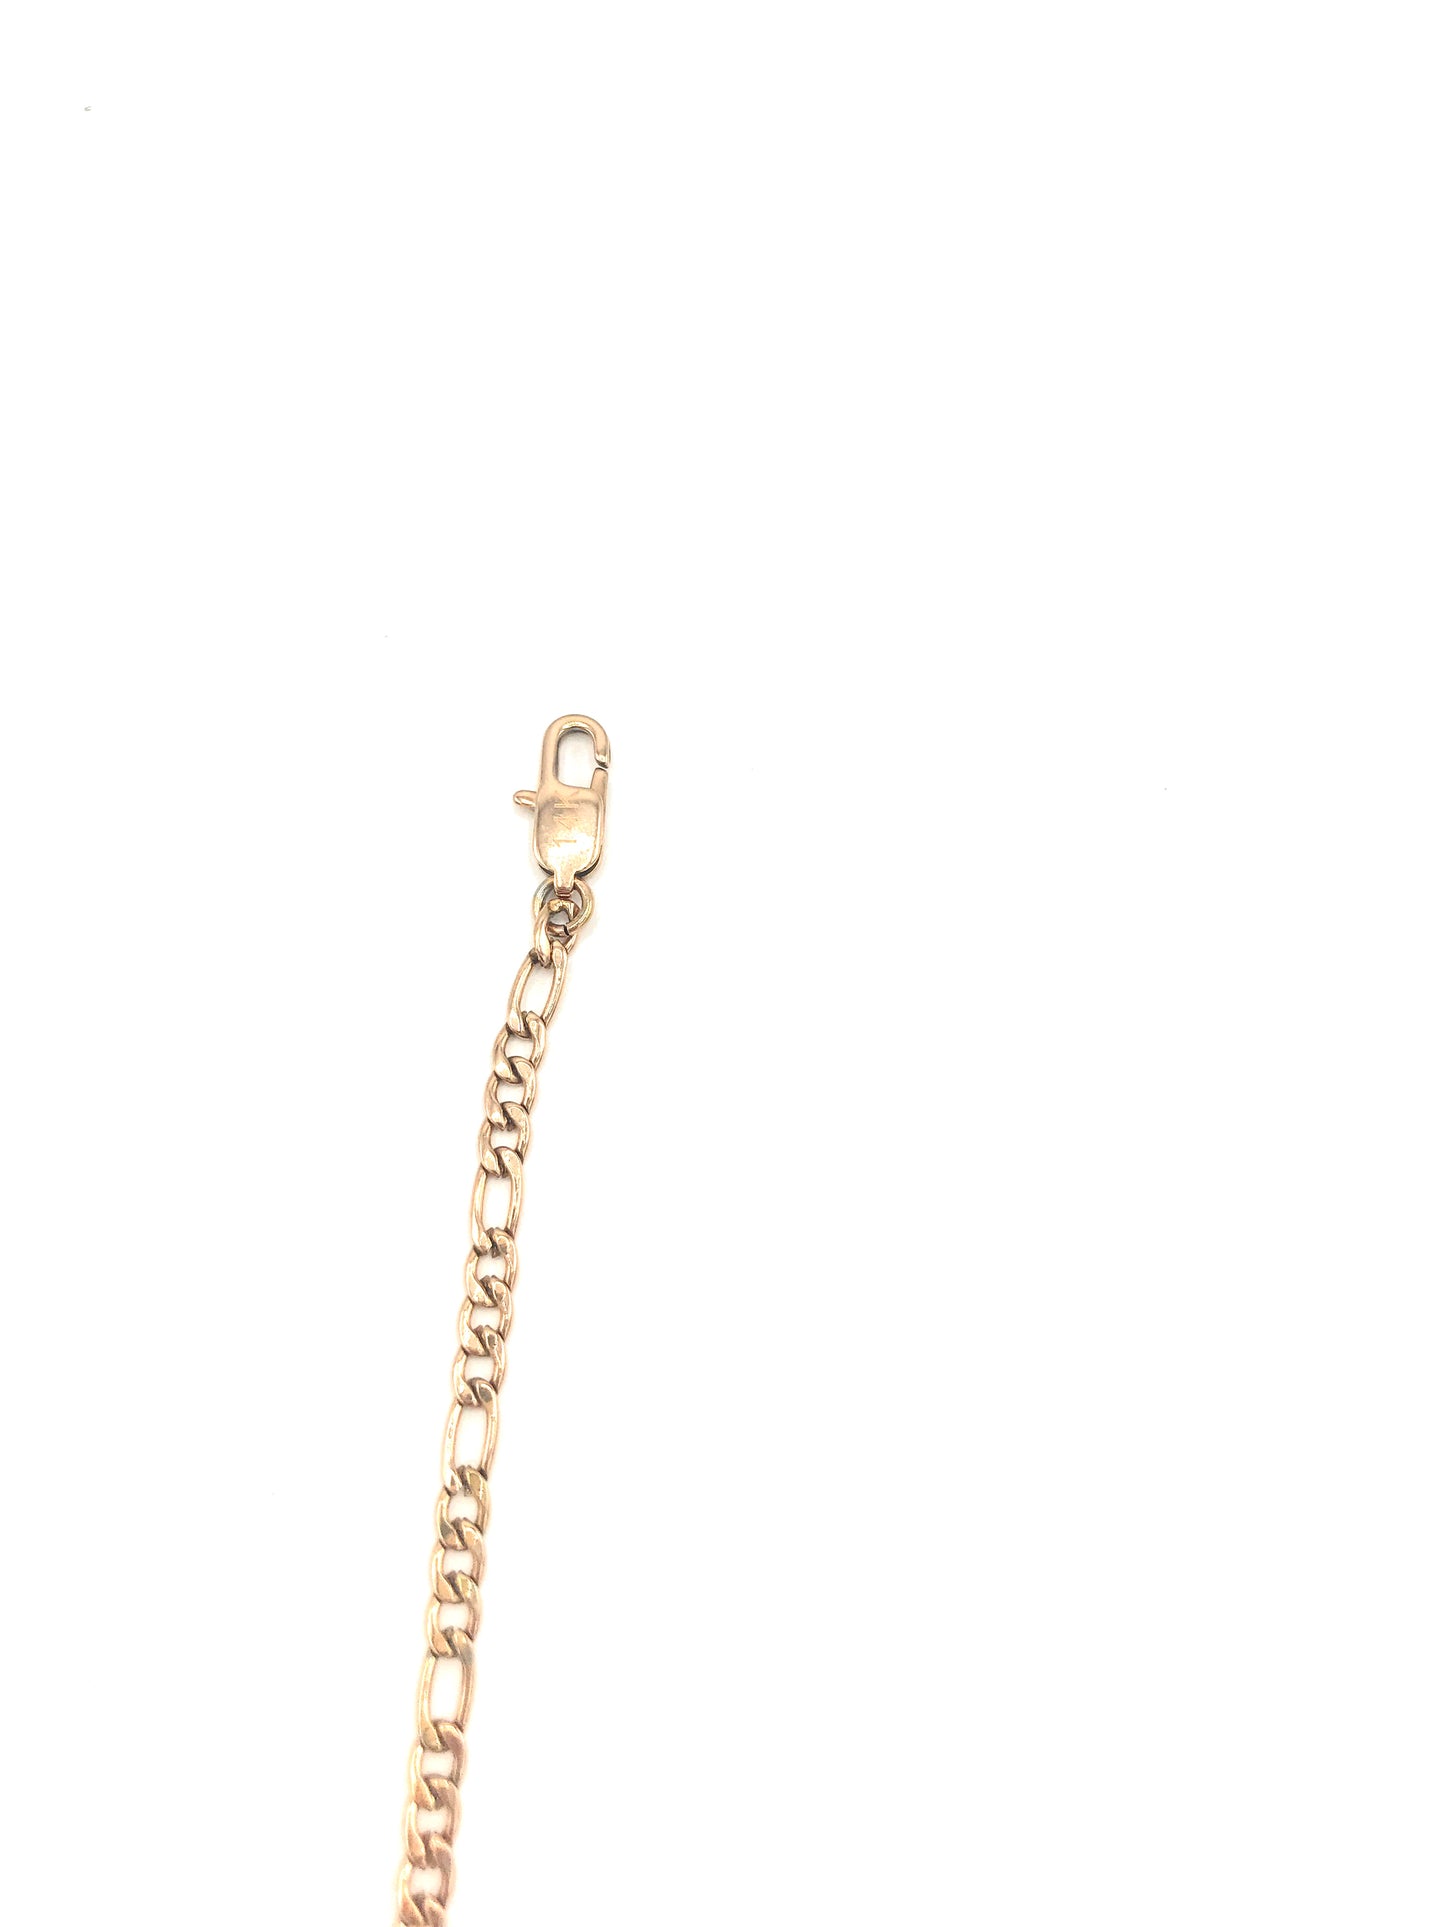 Figaro Rose Gold Chain 3mm Fine 14k Necklace Women Men Jewelry Strong Solid Plated Clasp Gift with Lobster Clasp Valentine 22" 24" - Incredible Chic Collections™ LLC